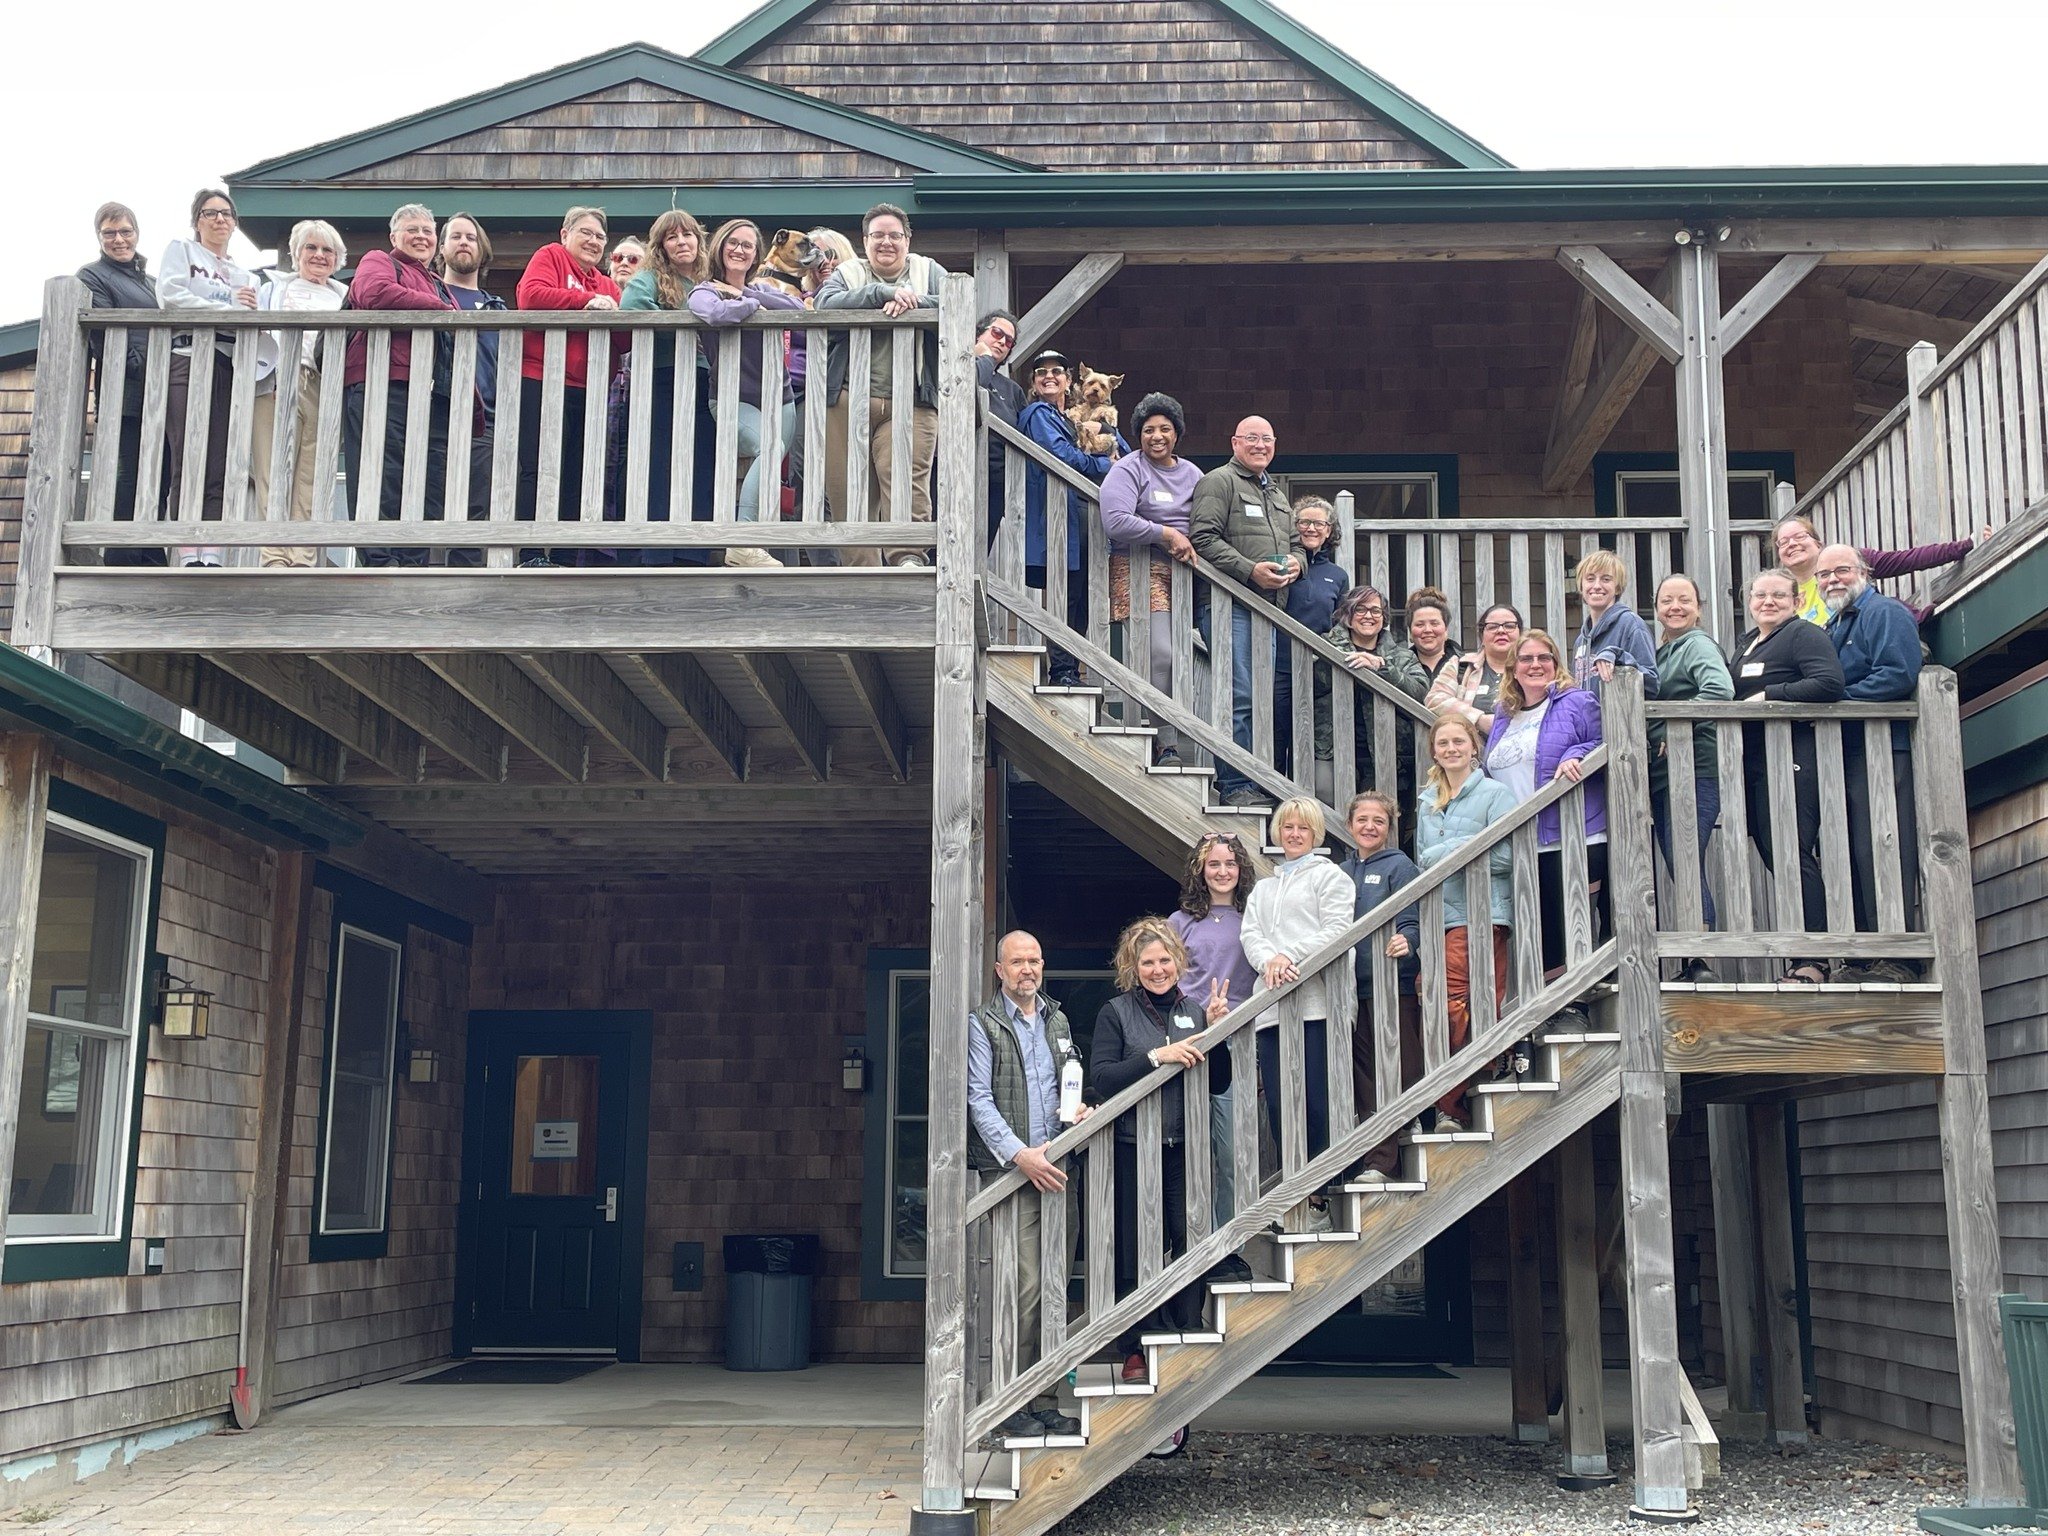 We are so filled up from an incredible Retreat week with this kind and brave group that joined us in Maine! During each Retreat we host, we are reminded of the power community has in the process of healing. 💜

In one participant's words:
&quot;I fel